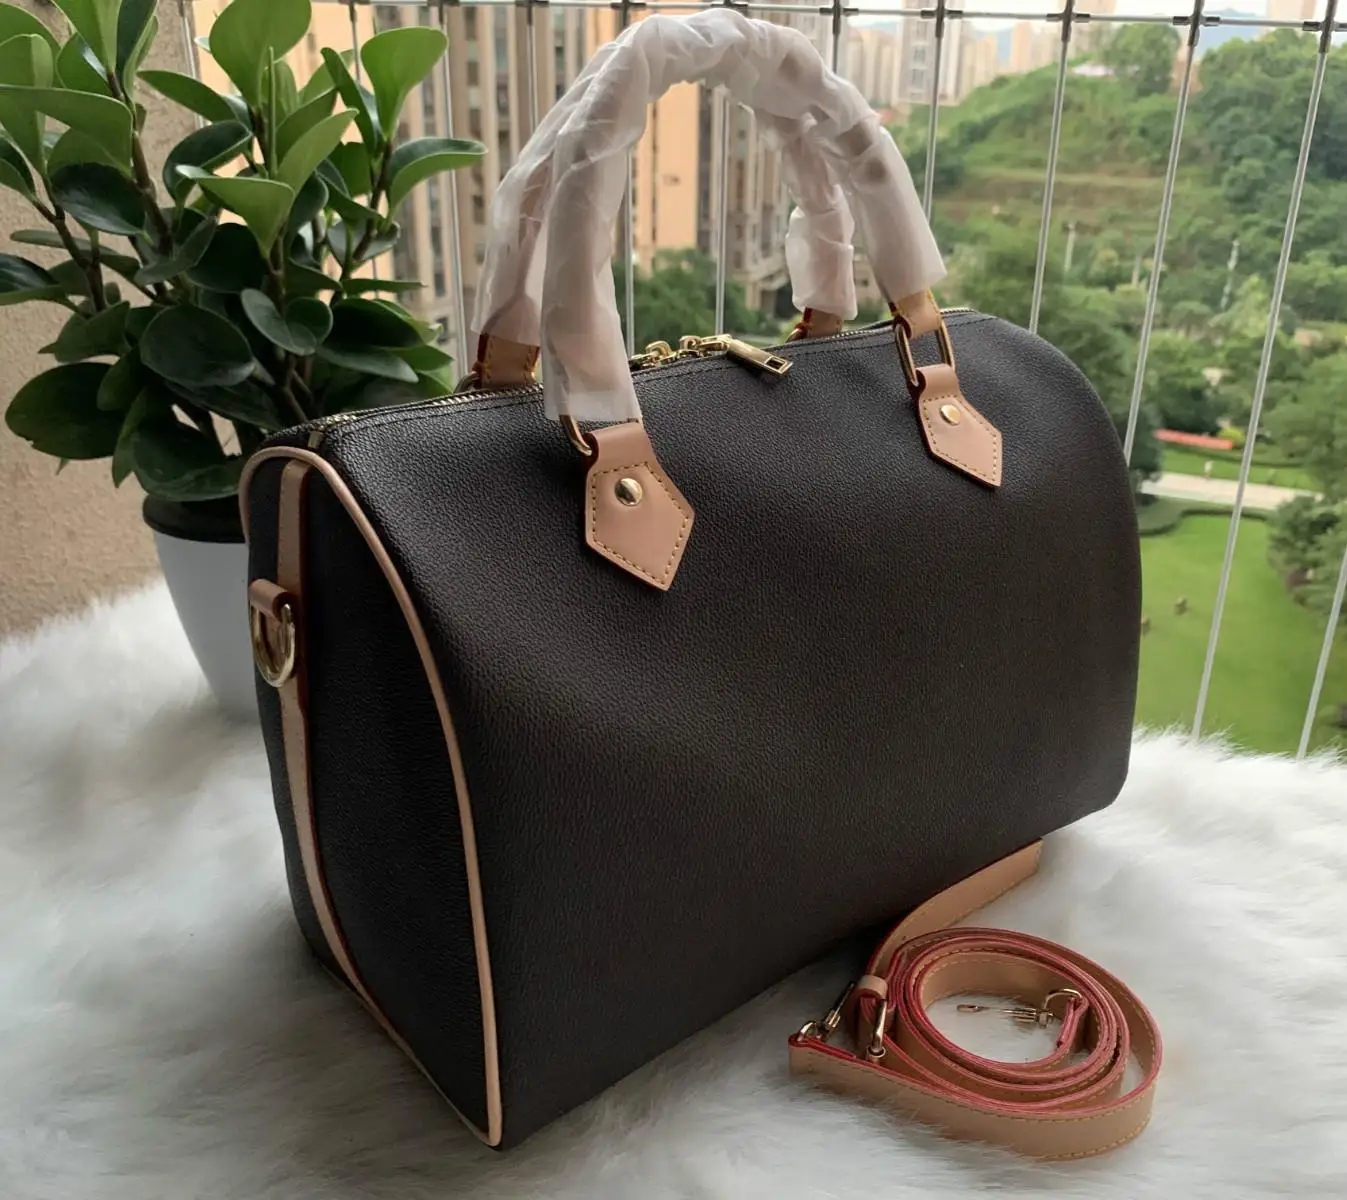 

2020 Women Messenger Travel bag Classic Style Fashion bags Shoulder Bags Lady Totes handbags Speedy 30 cm With Gold lock, Customizable